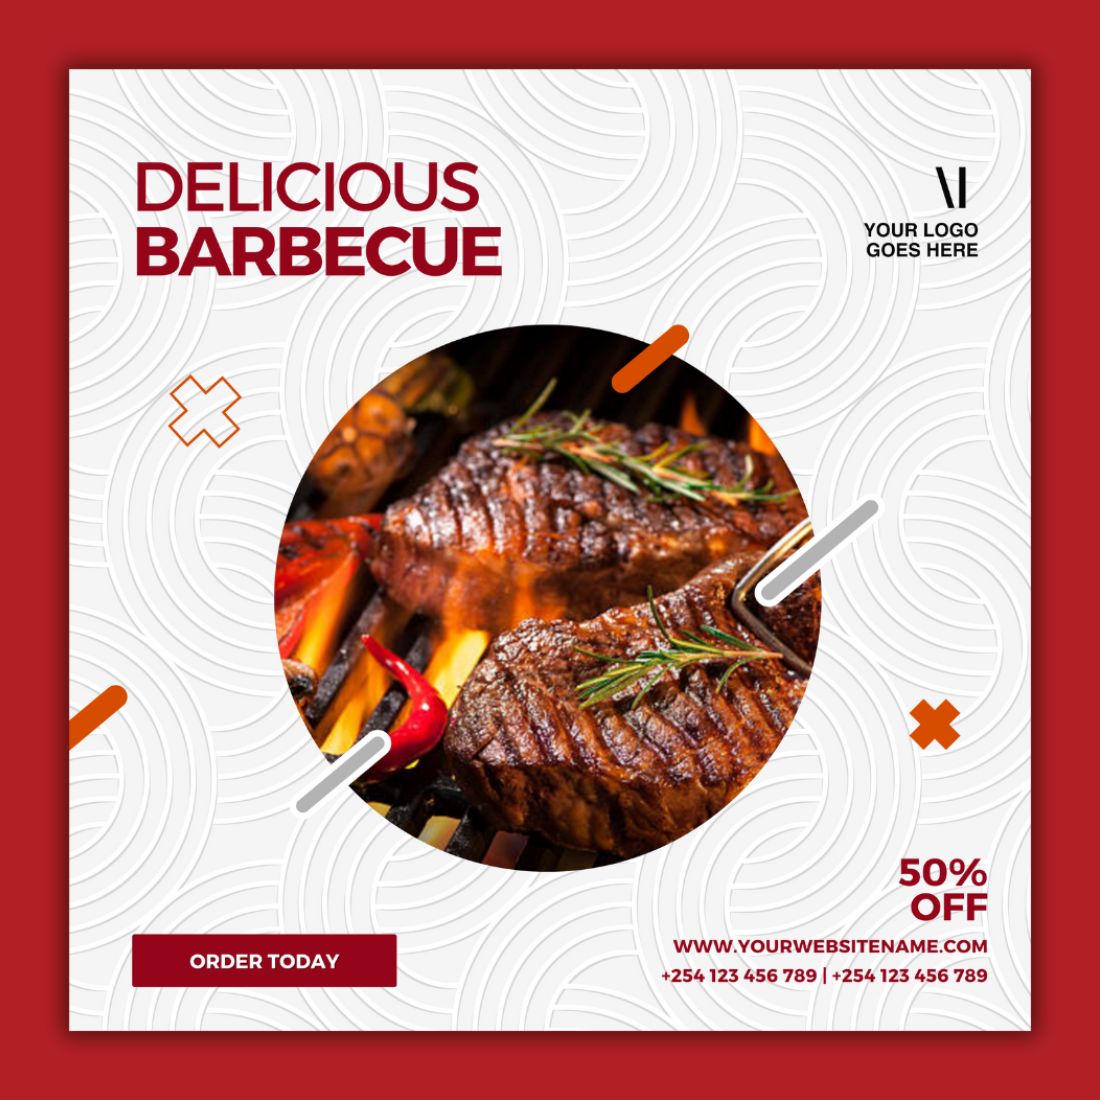 Barbecue Fast Food Social Media Post Template cover image.